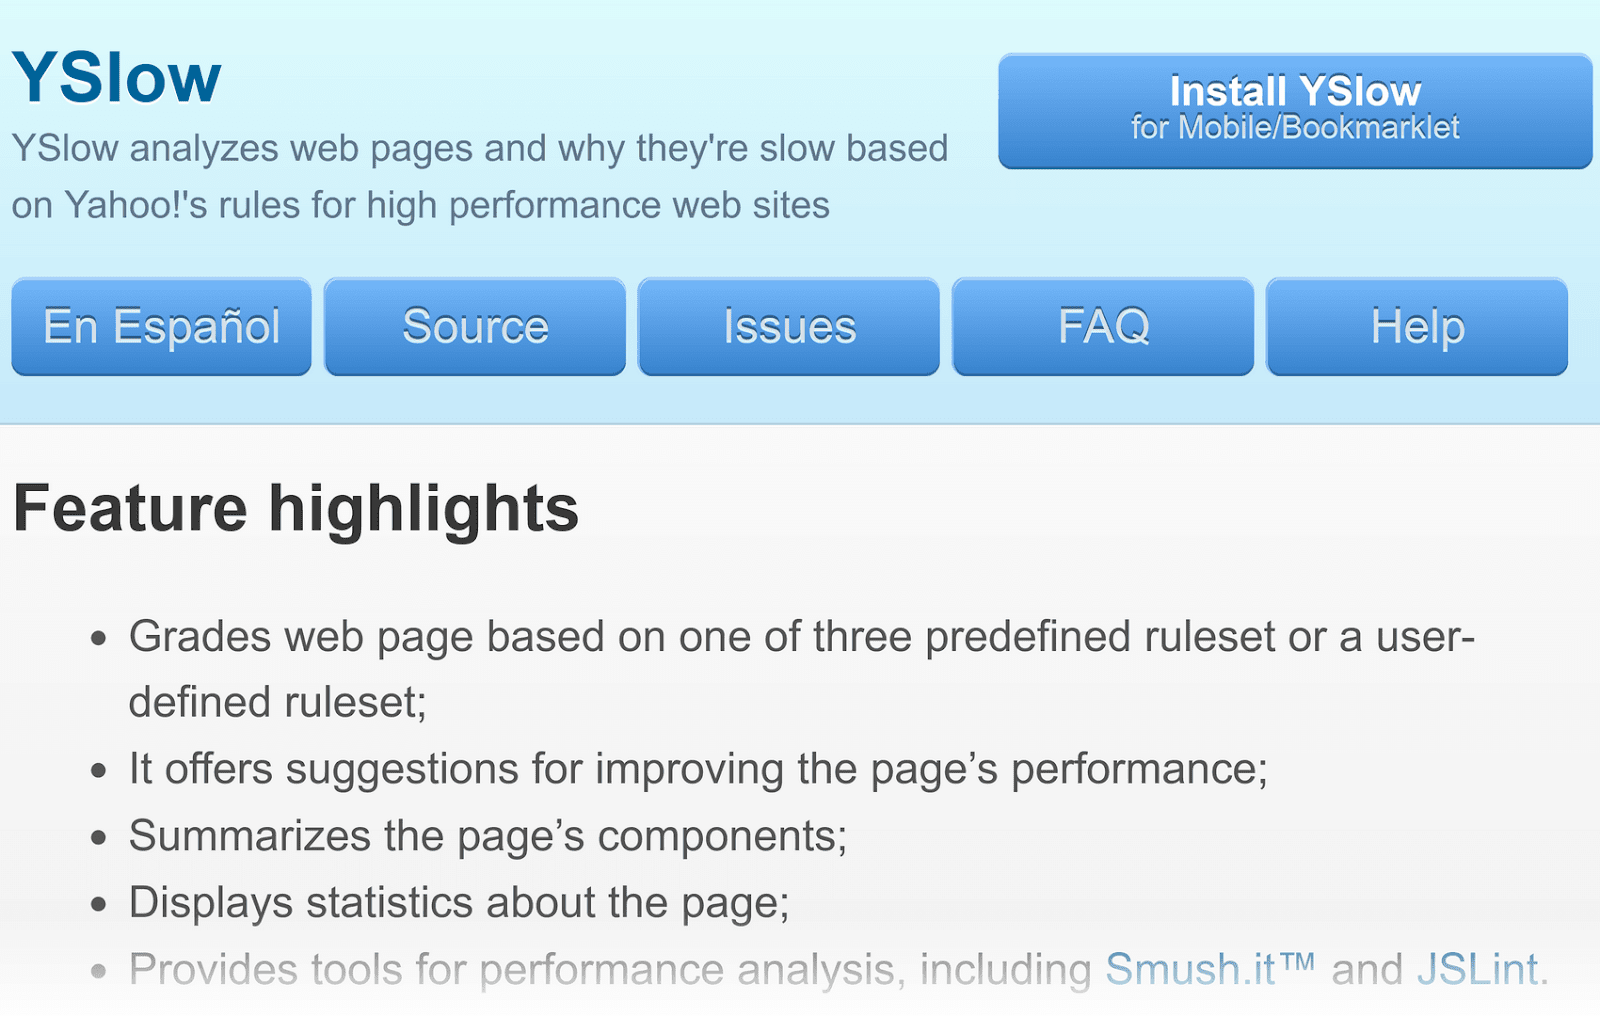 YSlow homepage with information about a tool which analyzes web pages based on Yahoo's rules for high performance.